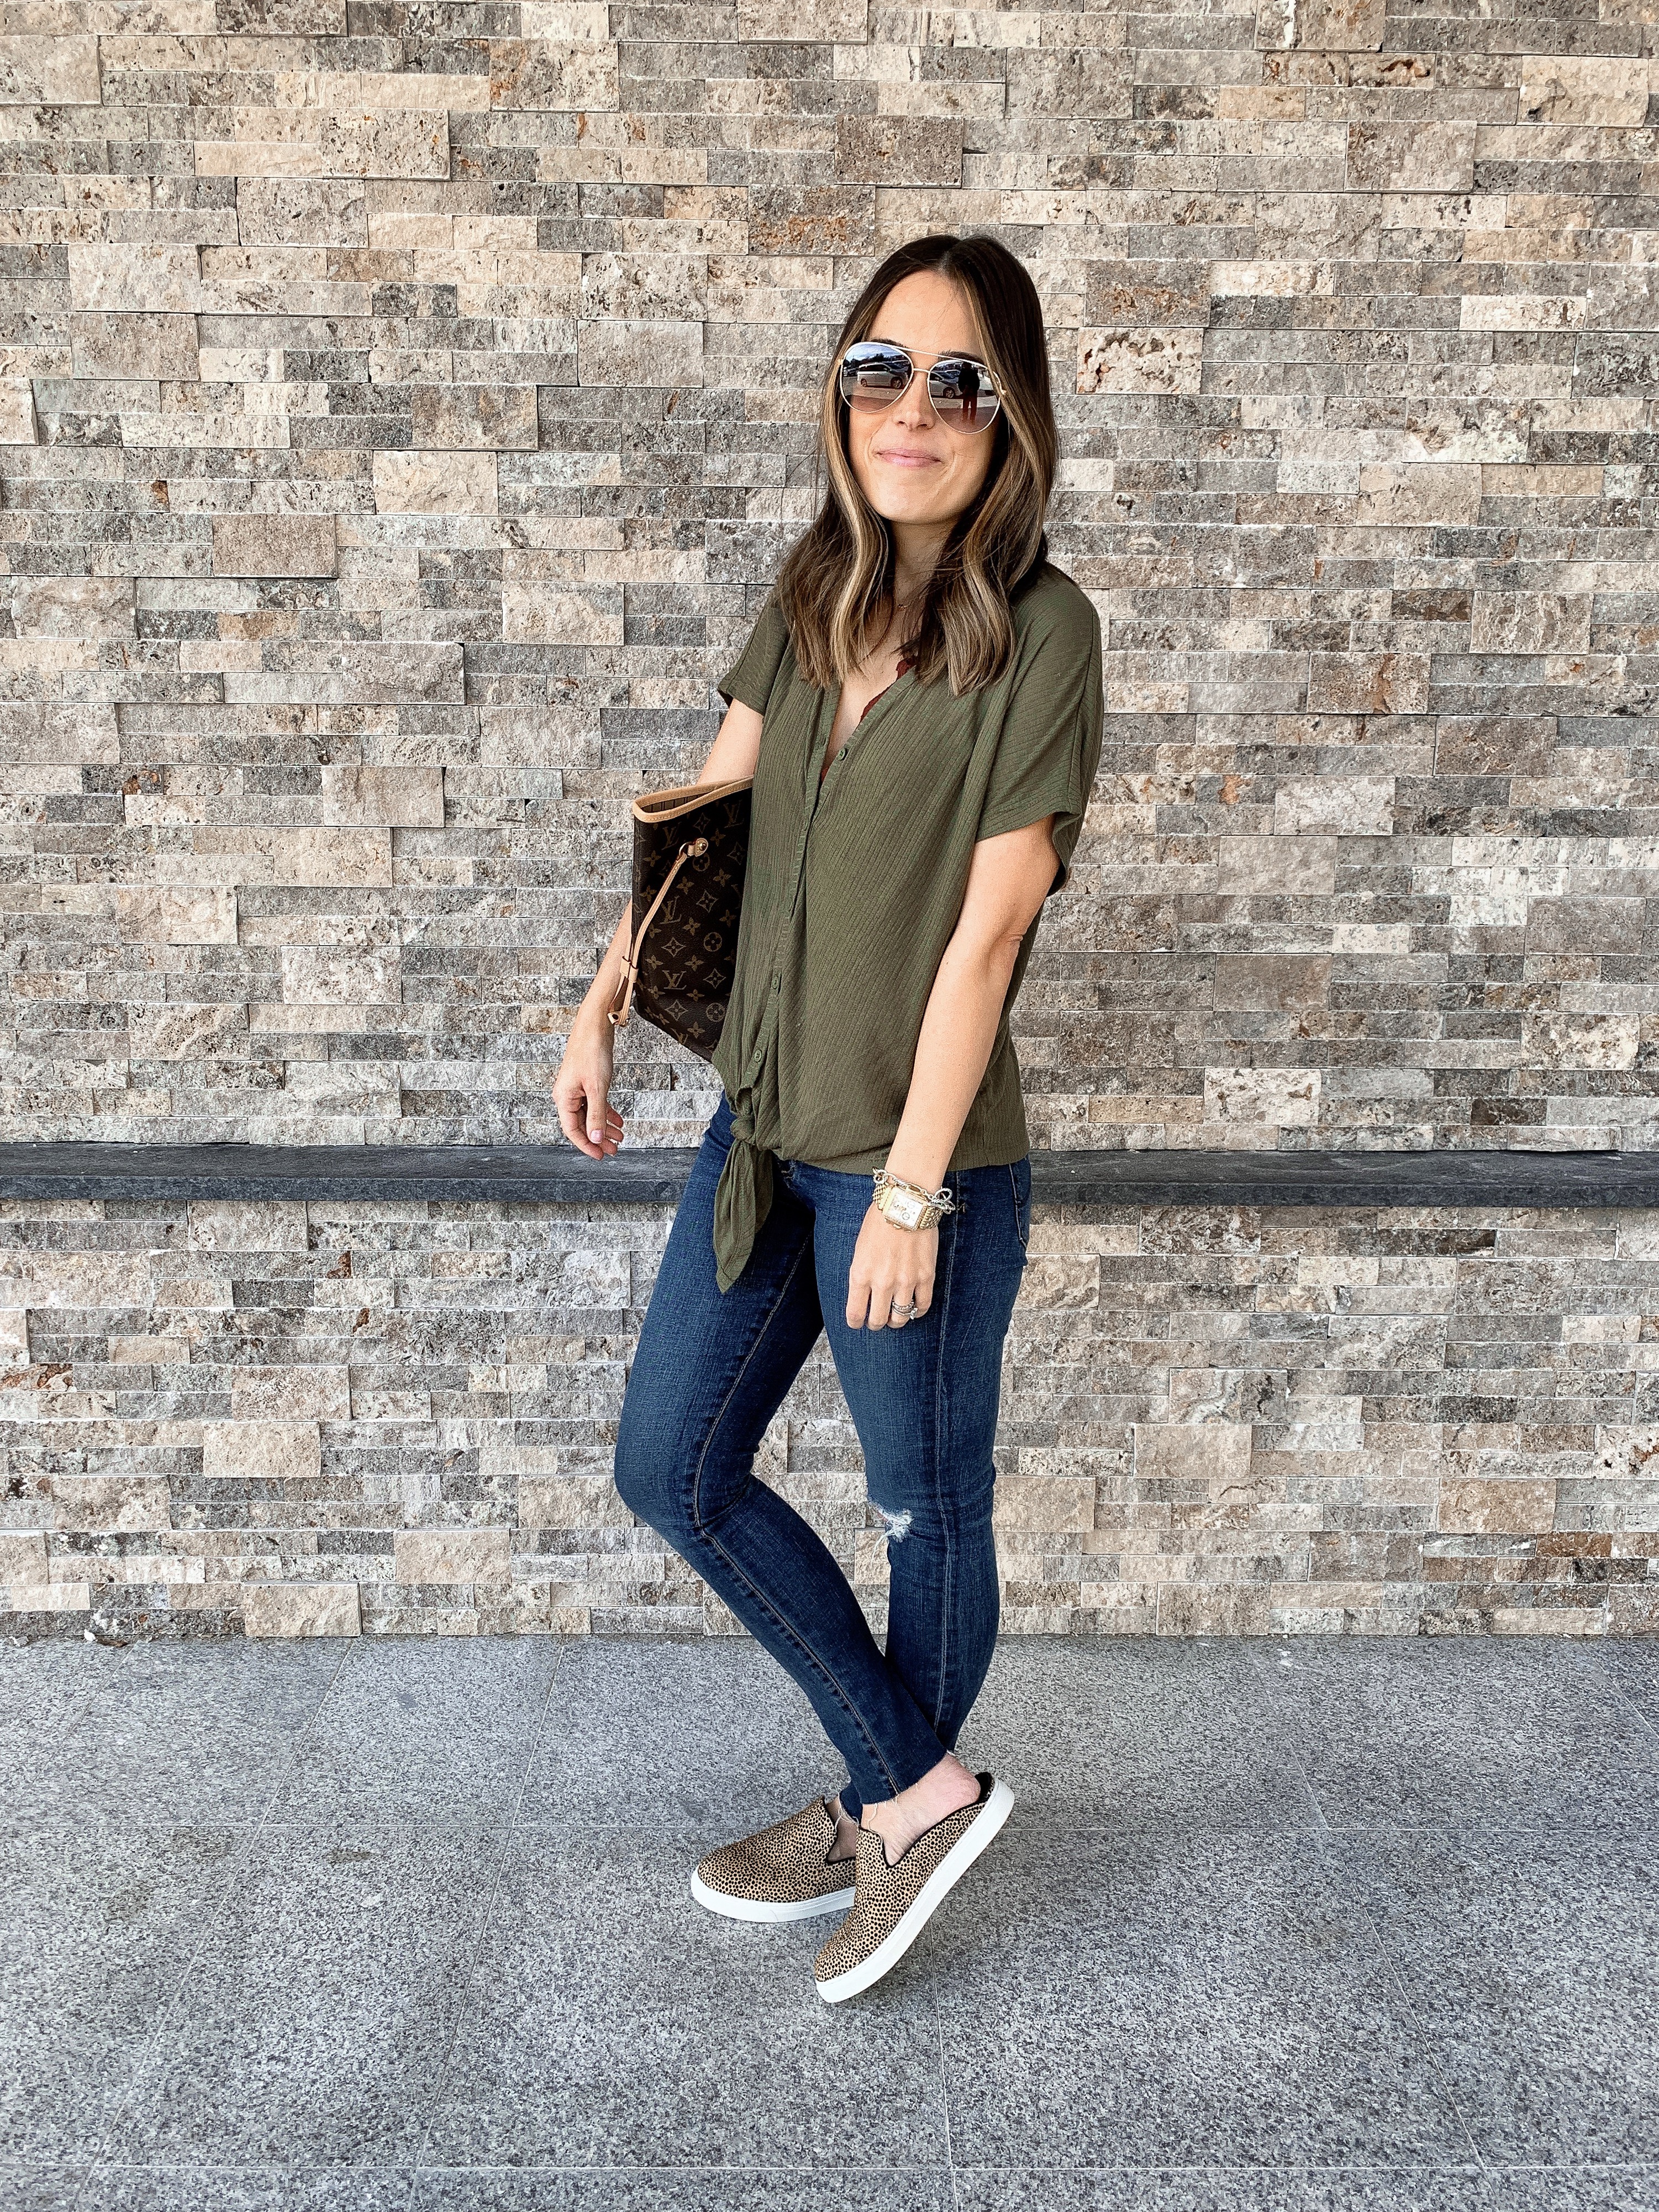 leopard slip on sneakers outfit